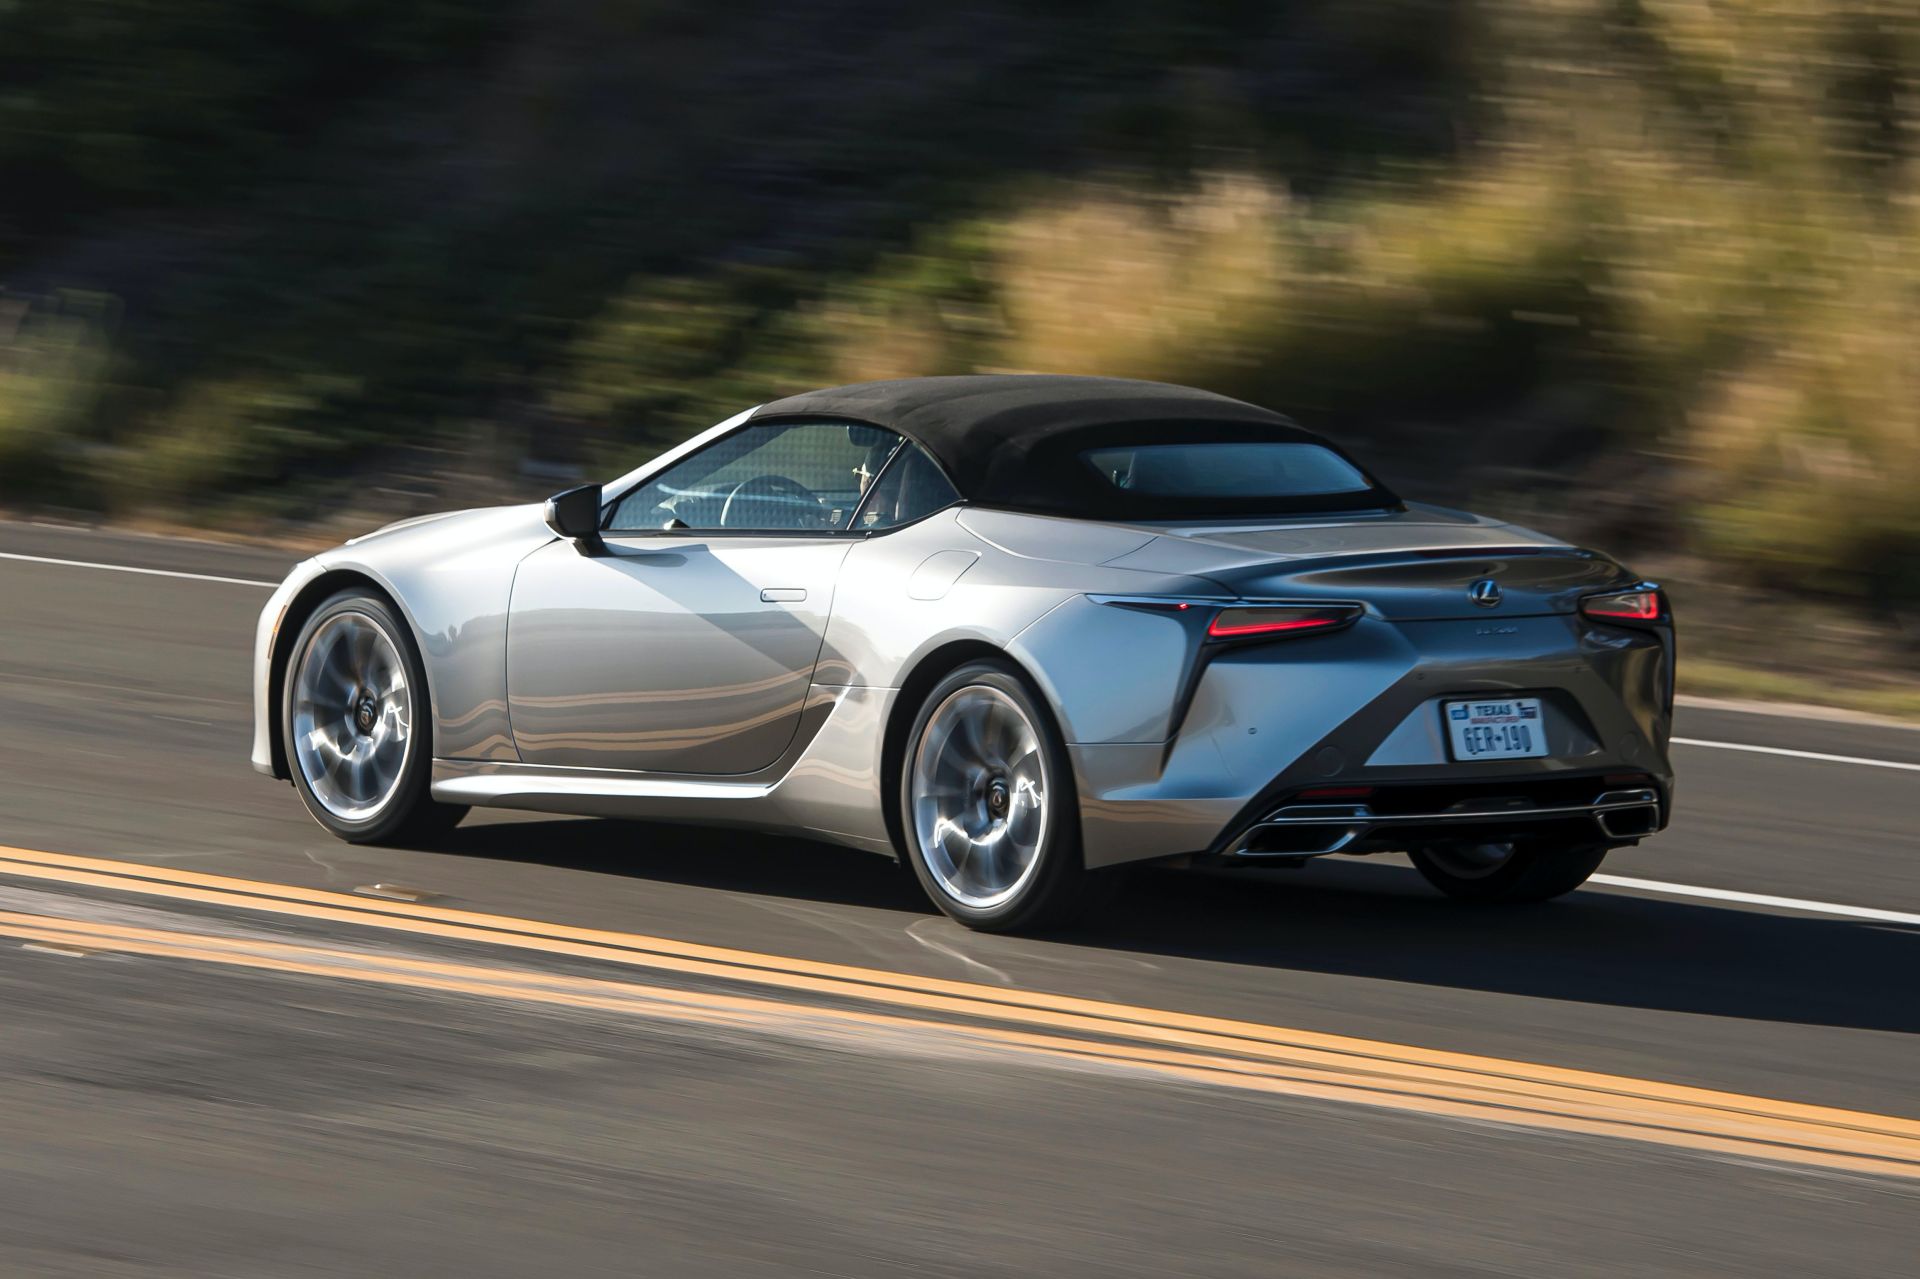 2021 Lexus LC500 Convertible Will Come To The US From This